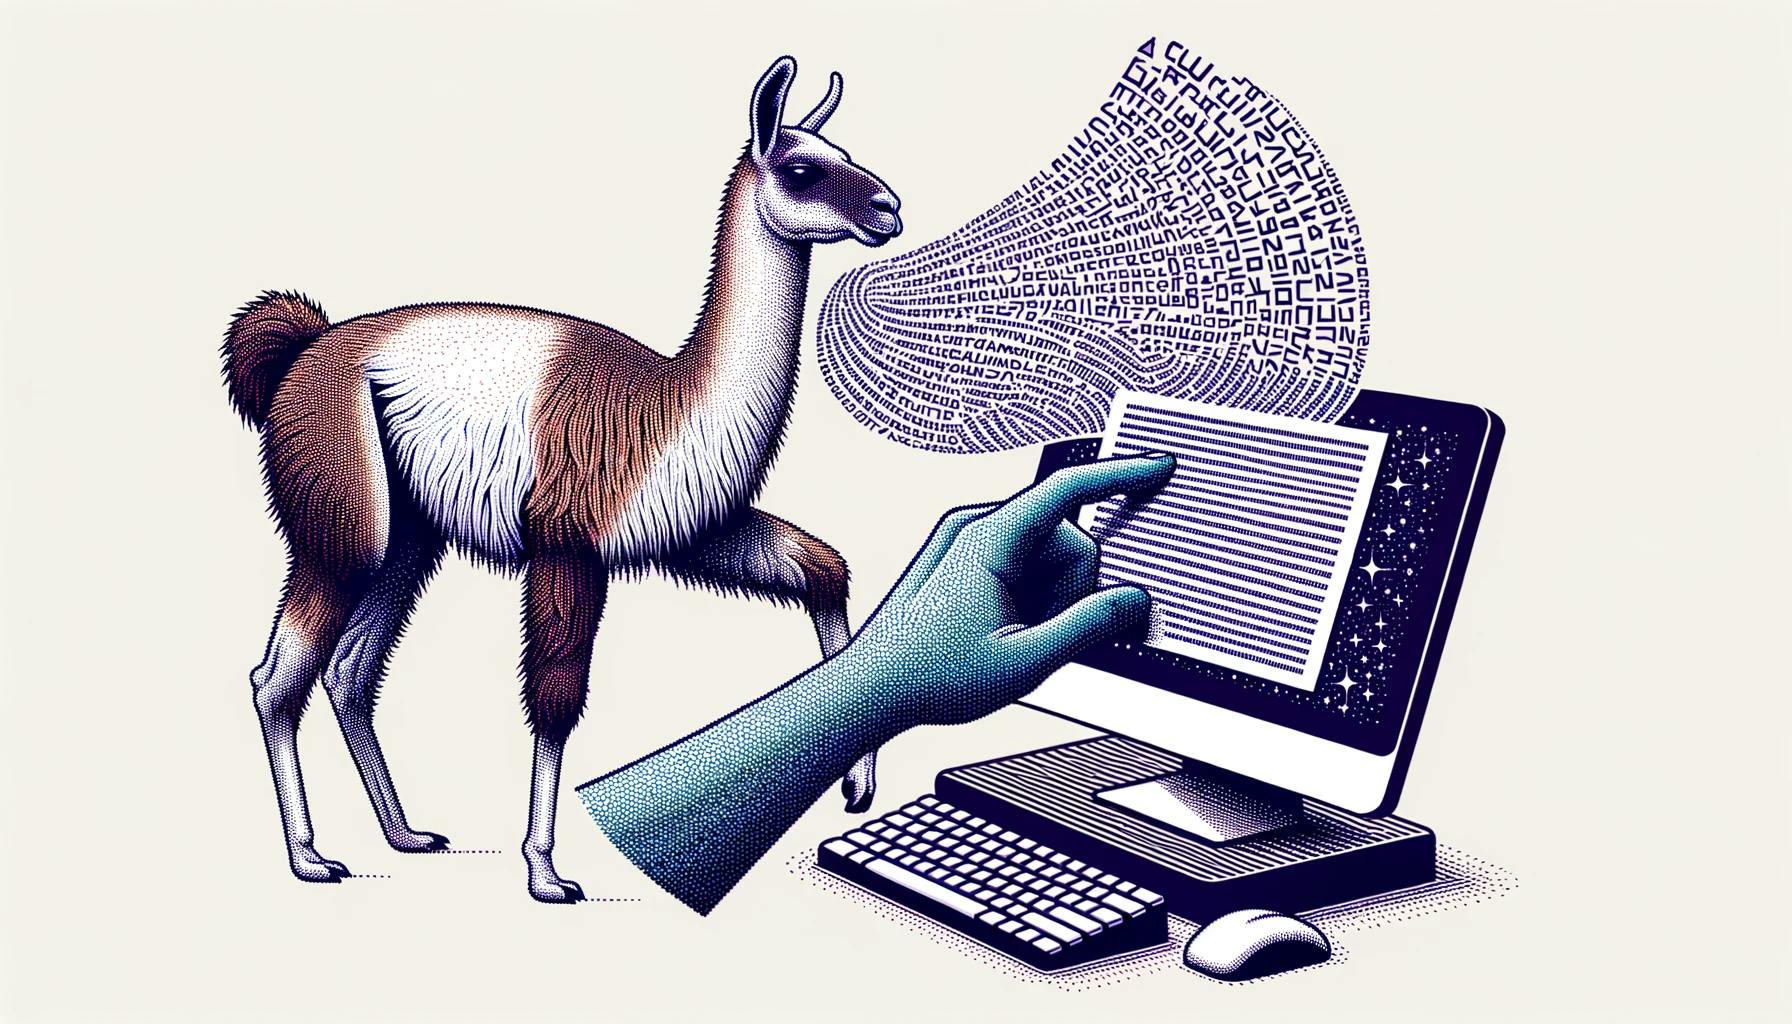 Dive deep into the world of Guanaco 65B, the revolutionary text-generation model. From its different versions to how to use it, this guide covers it all. Get ready to unlock the future of AI text generation.